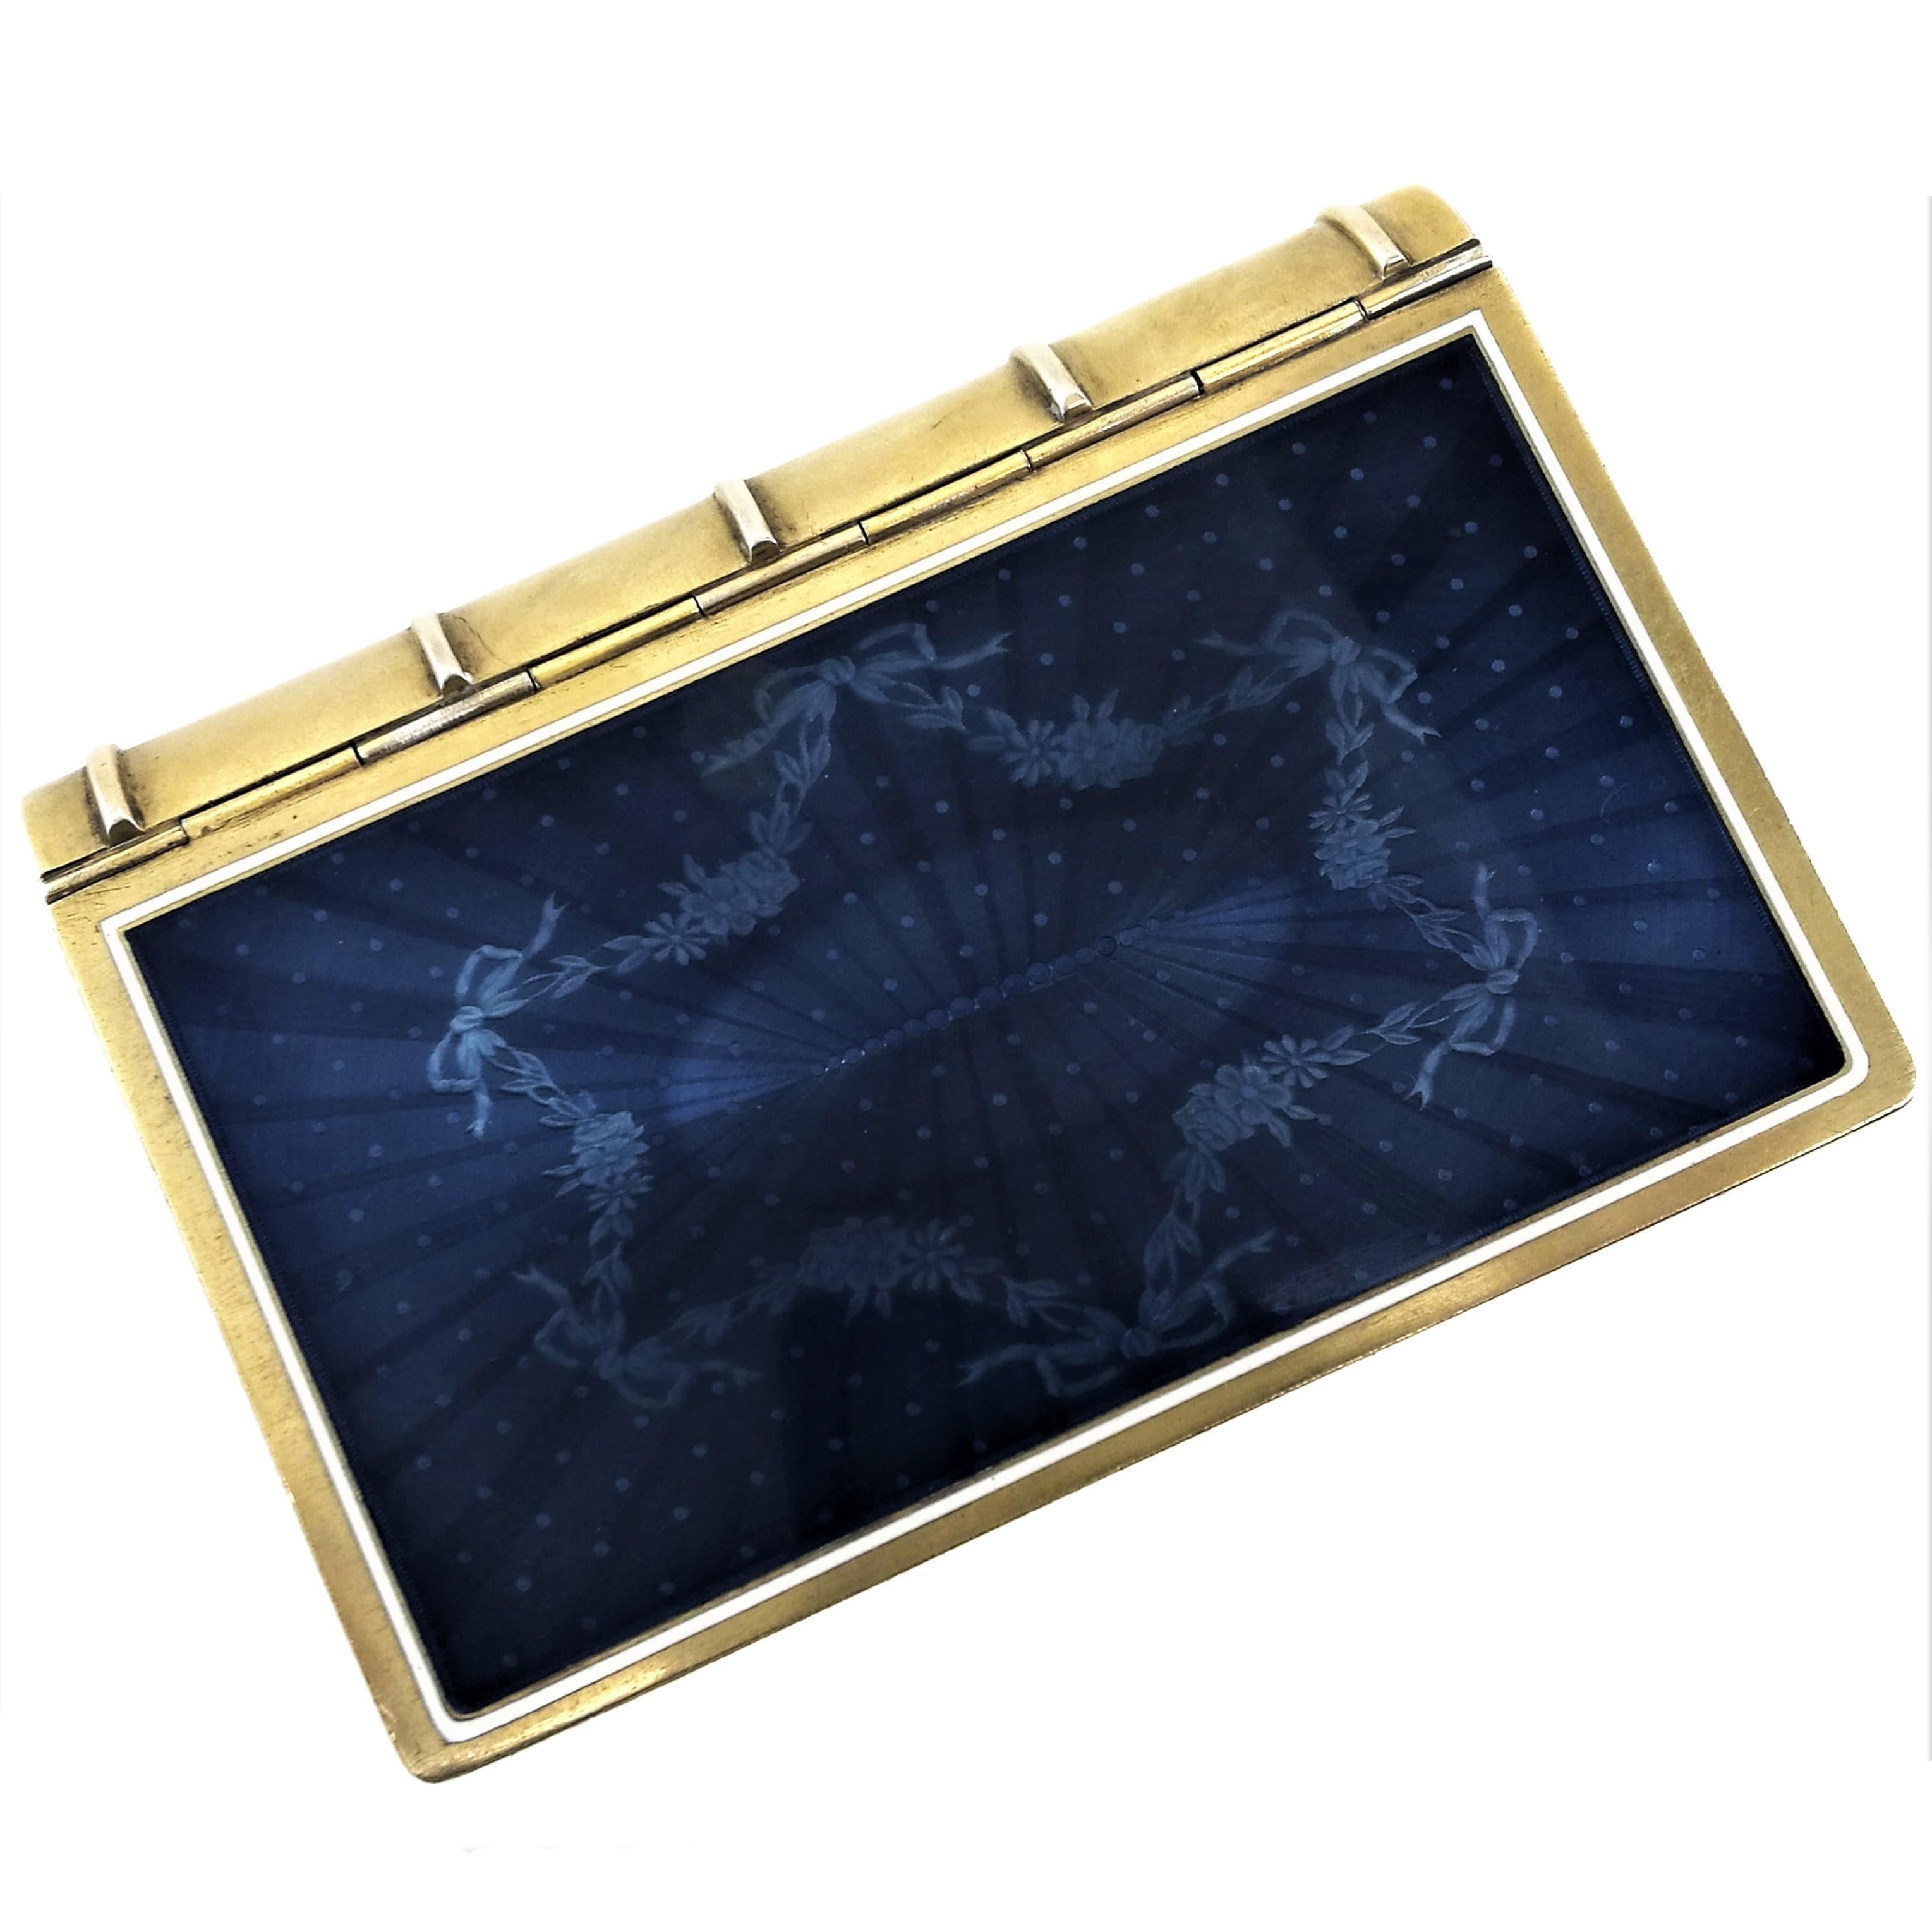 A gorgeous Antique French Silver and Enamel Writing Set or Desk Set encased in a silver and enamel box shaped like a book. The hinged front 'cover' features an iridescent deep blue guilloche enamel design on the exterior and interior surfaces. The